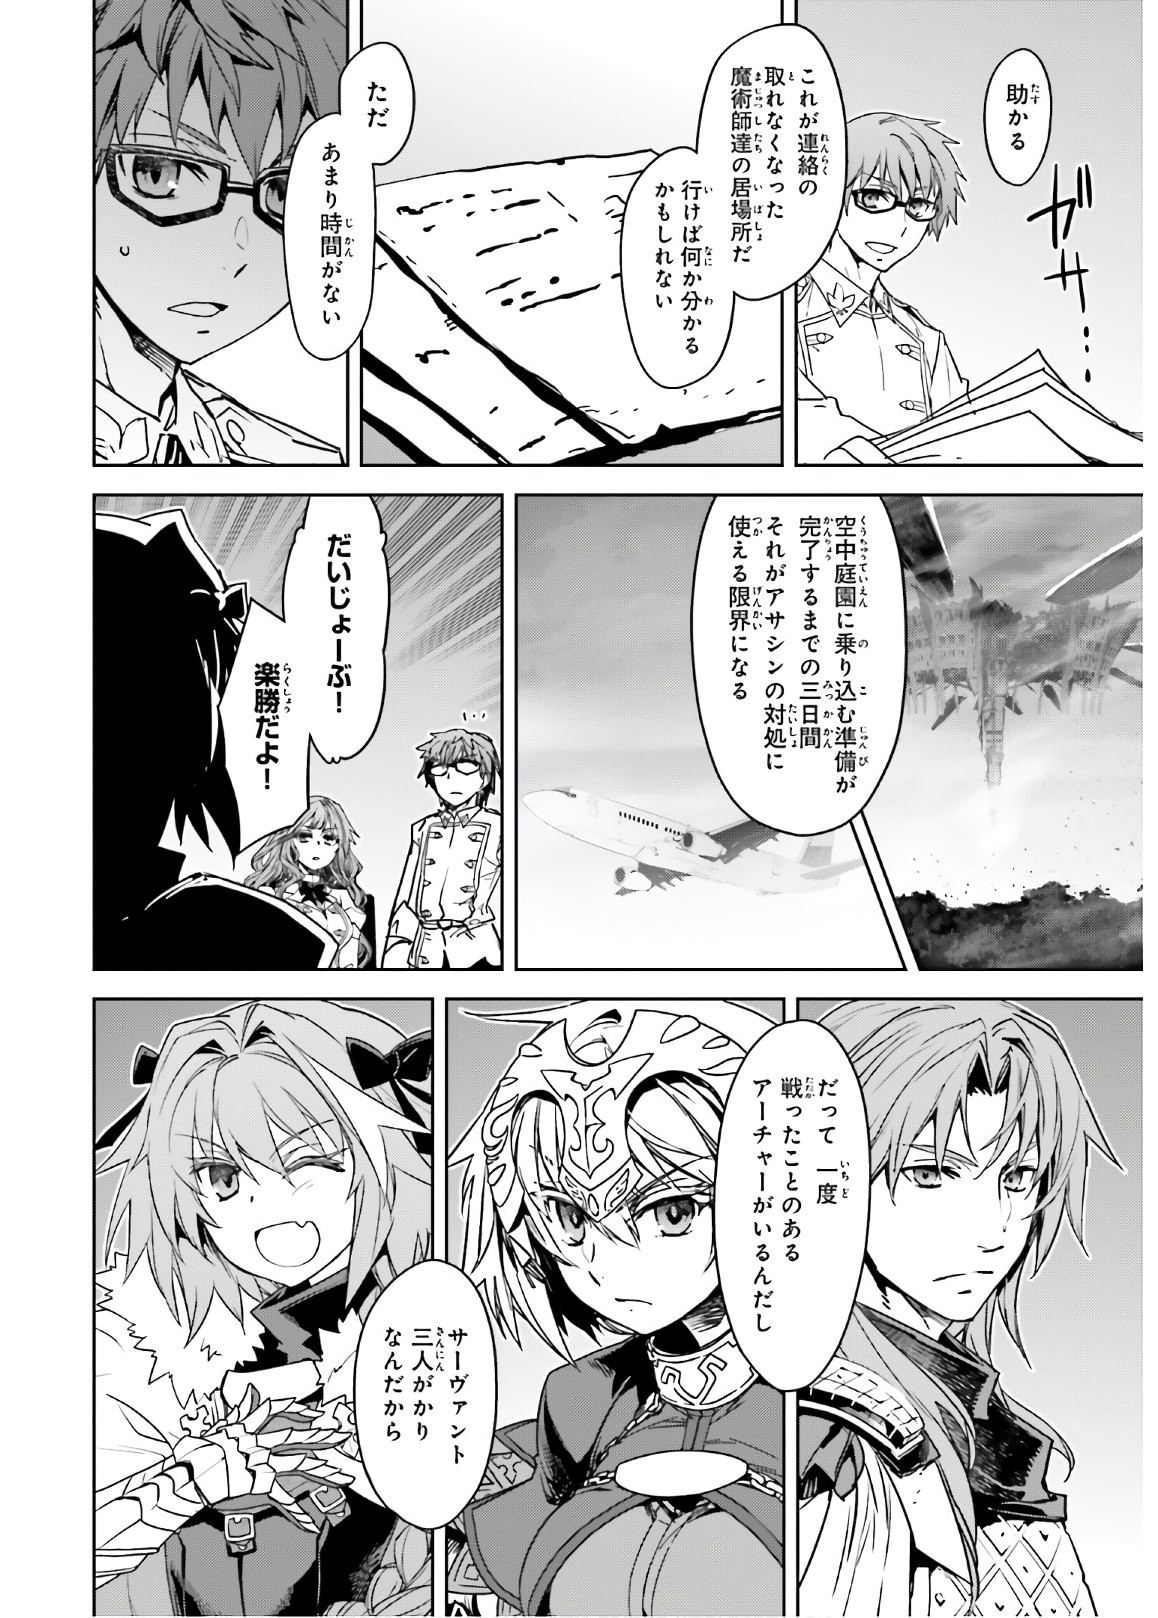 Fate-Apocrypha - Chapter 43 - Page 16